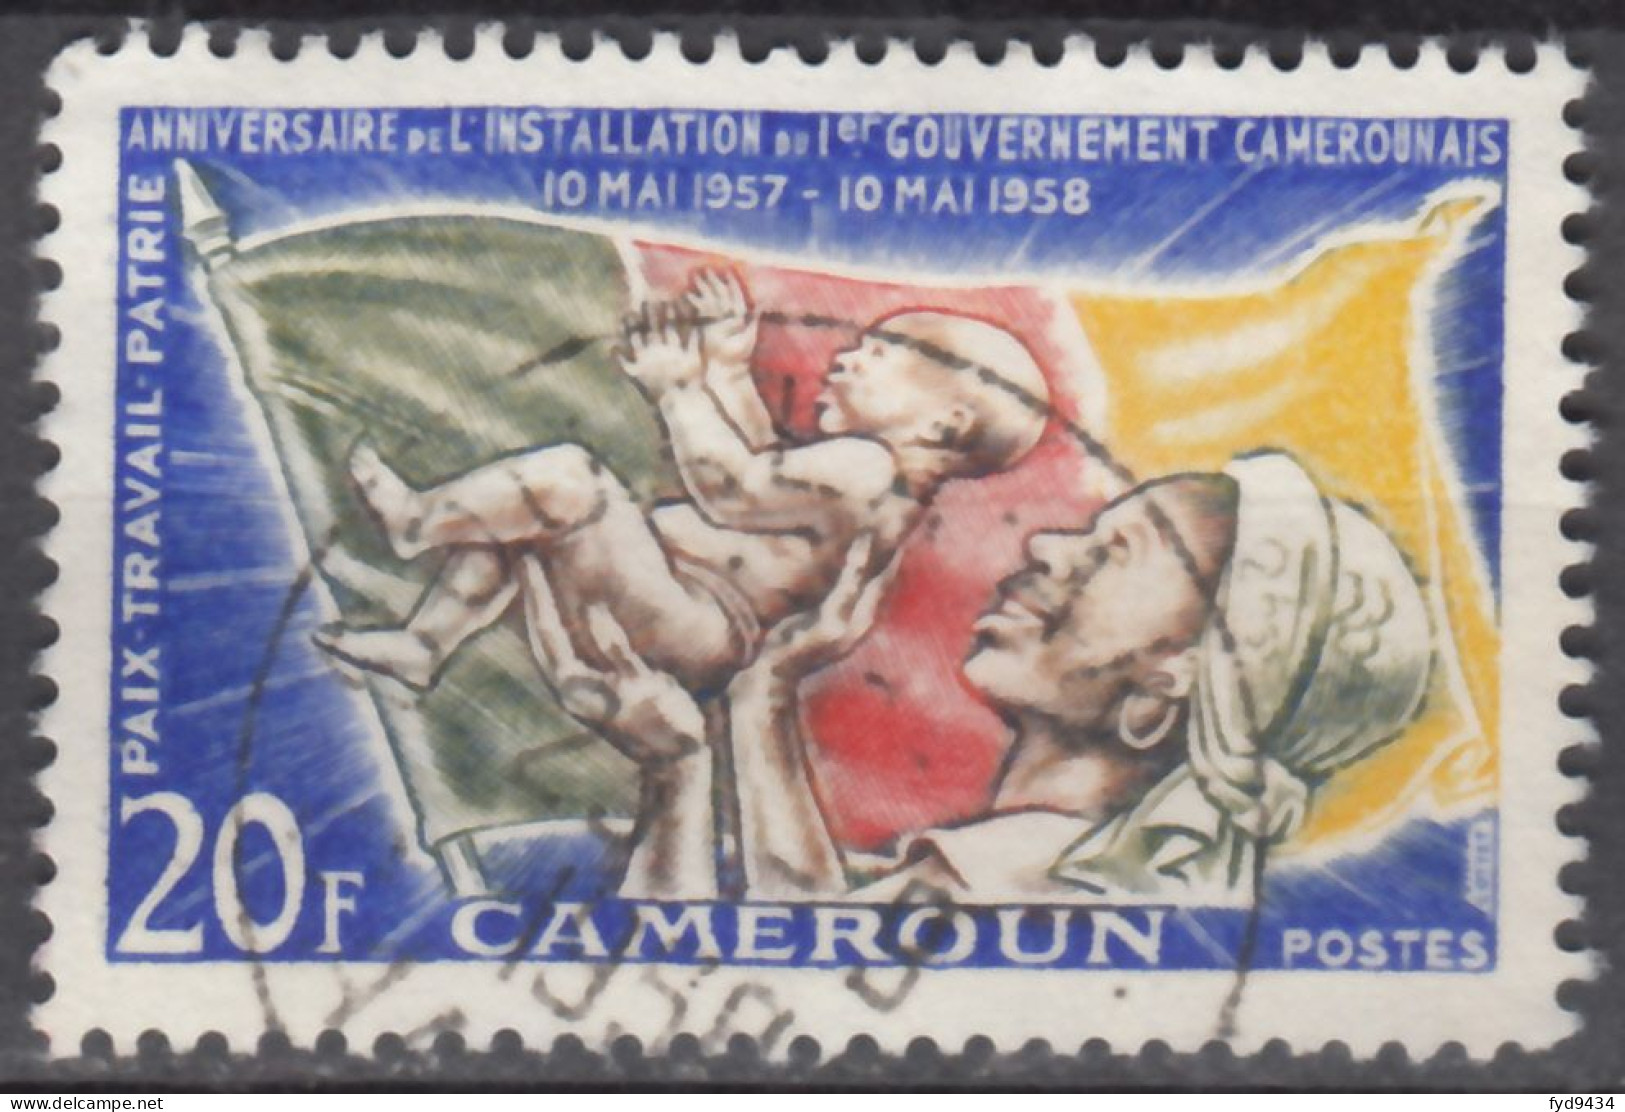 N° 305 - O - - Used Stamps